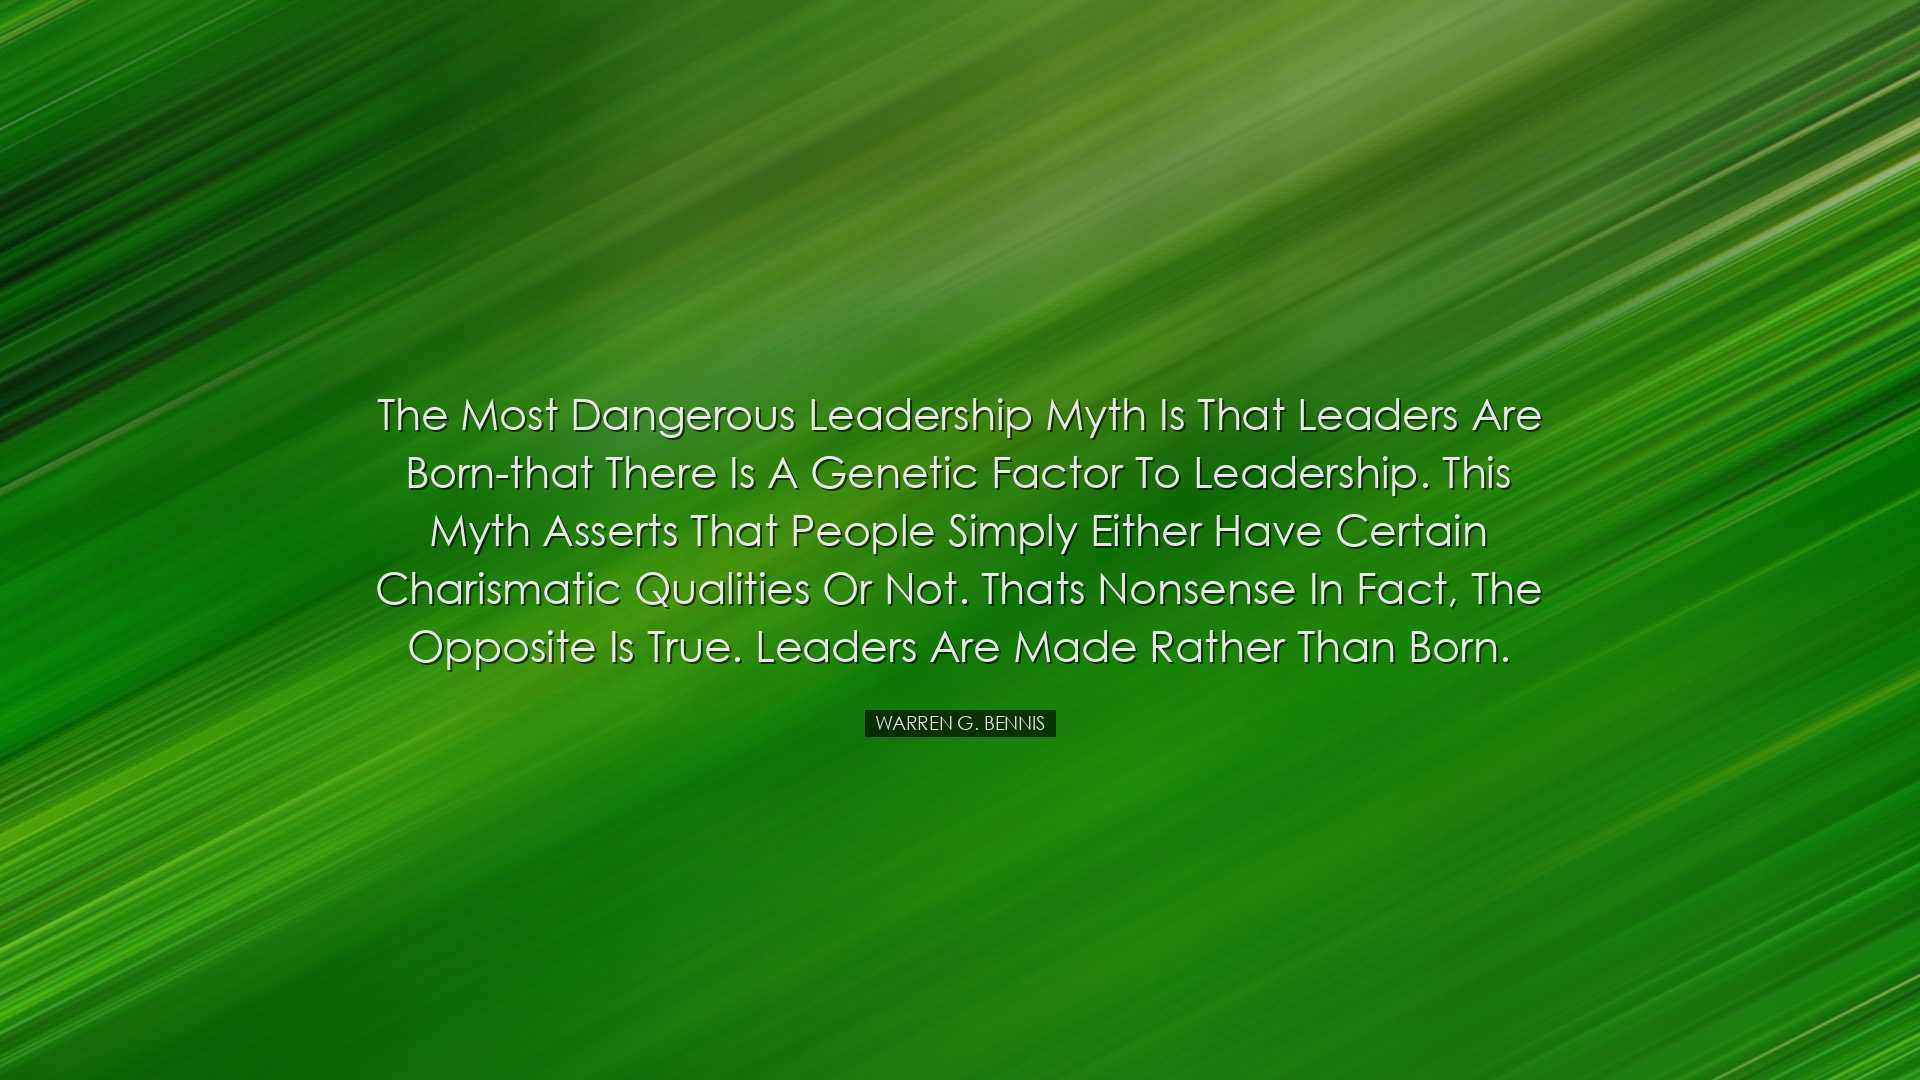 The most dangerous leadership myth is that leaders are born-that t